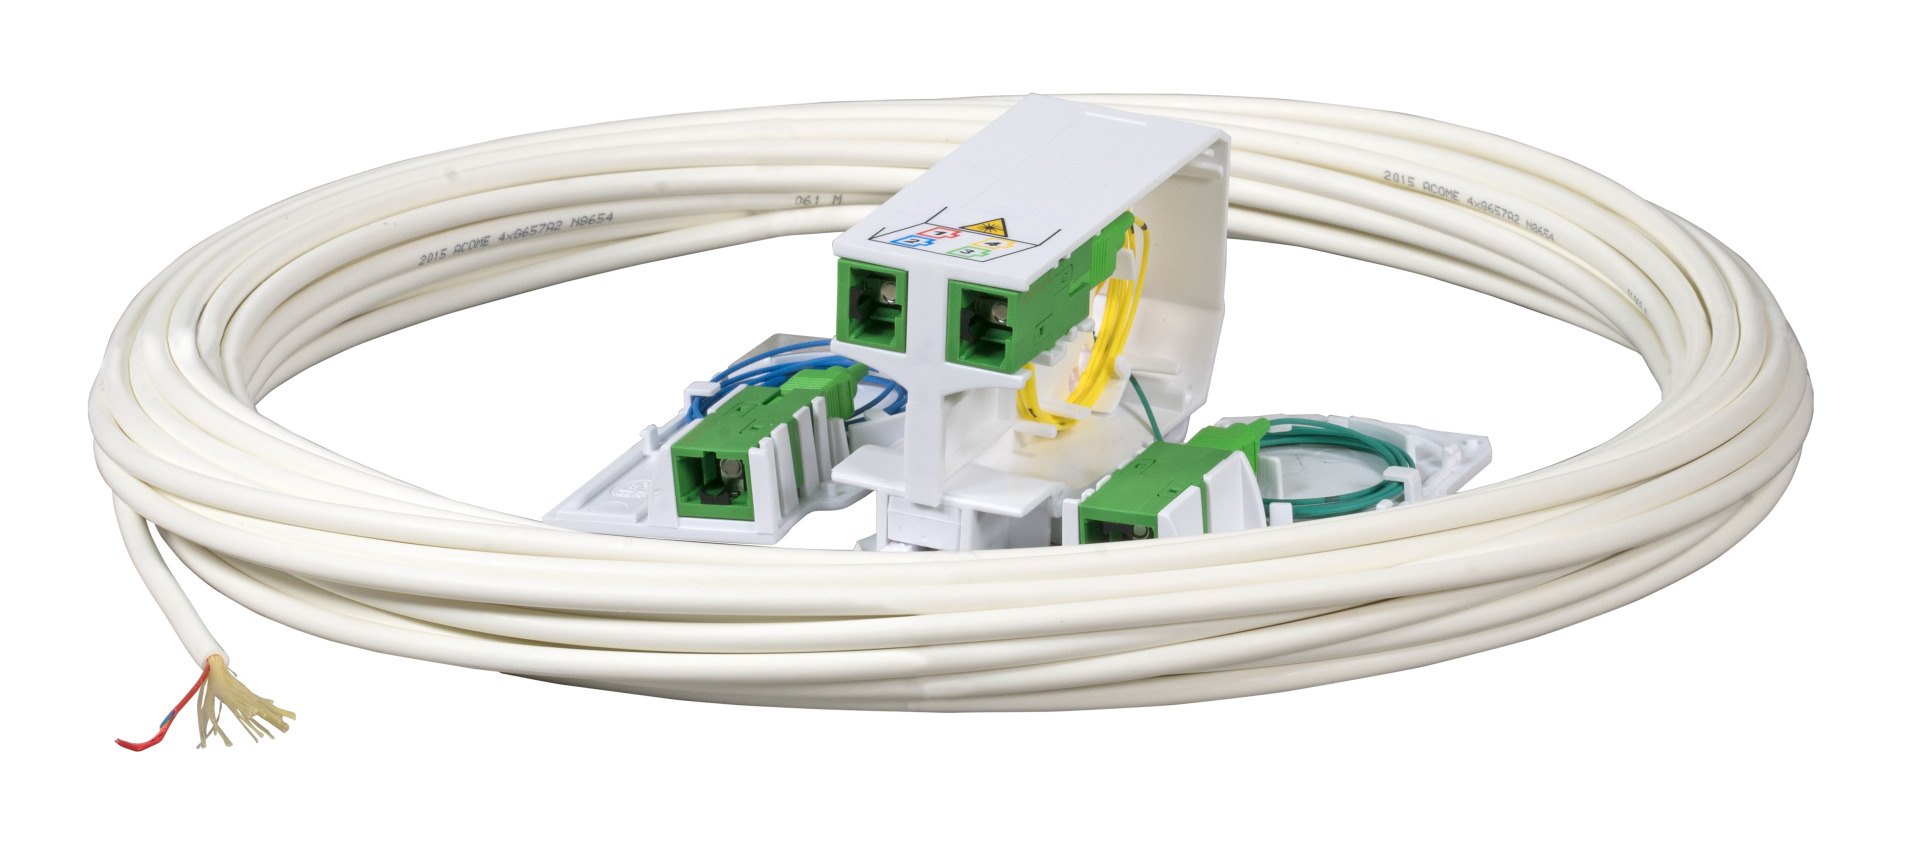 FTTH DIN RAIL Adapter,1x SC/APC adapter, Laserprotection integrated,100m DropCa